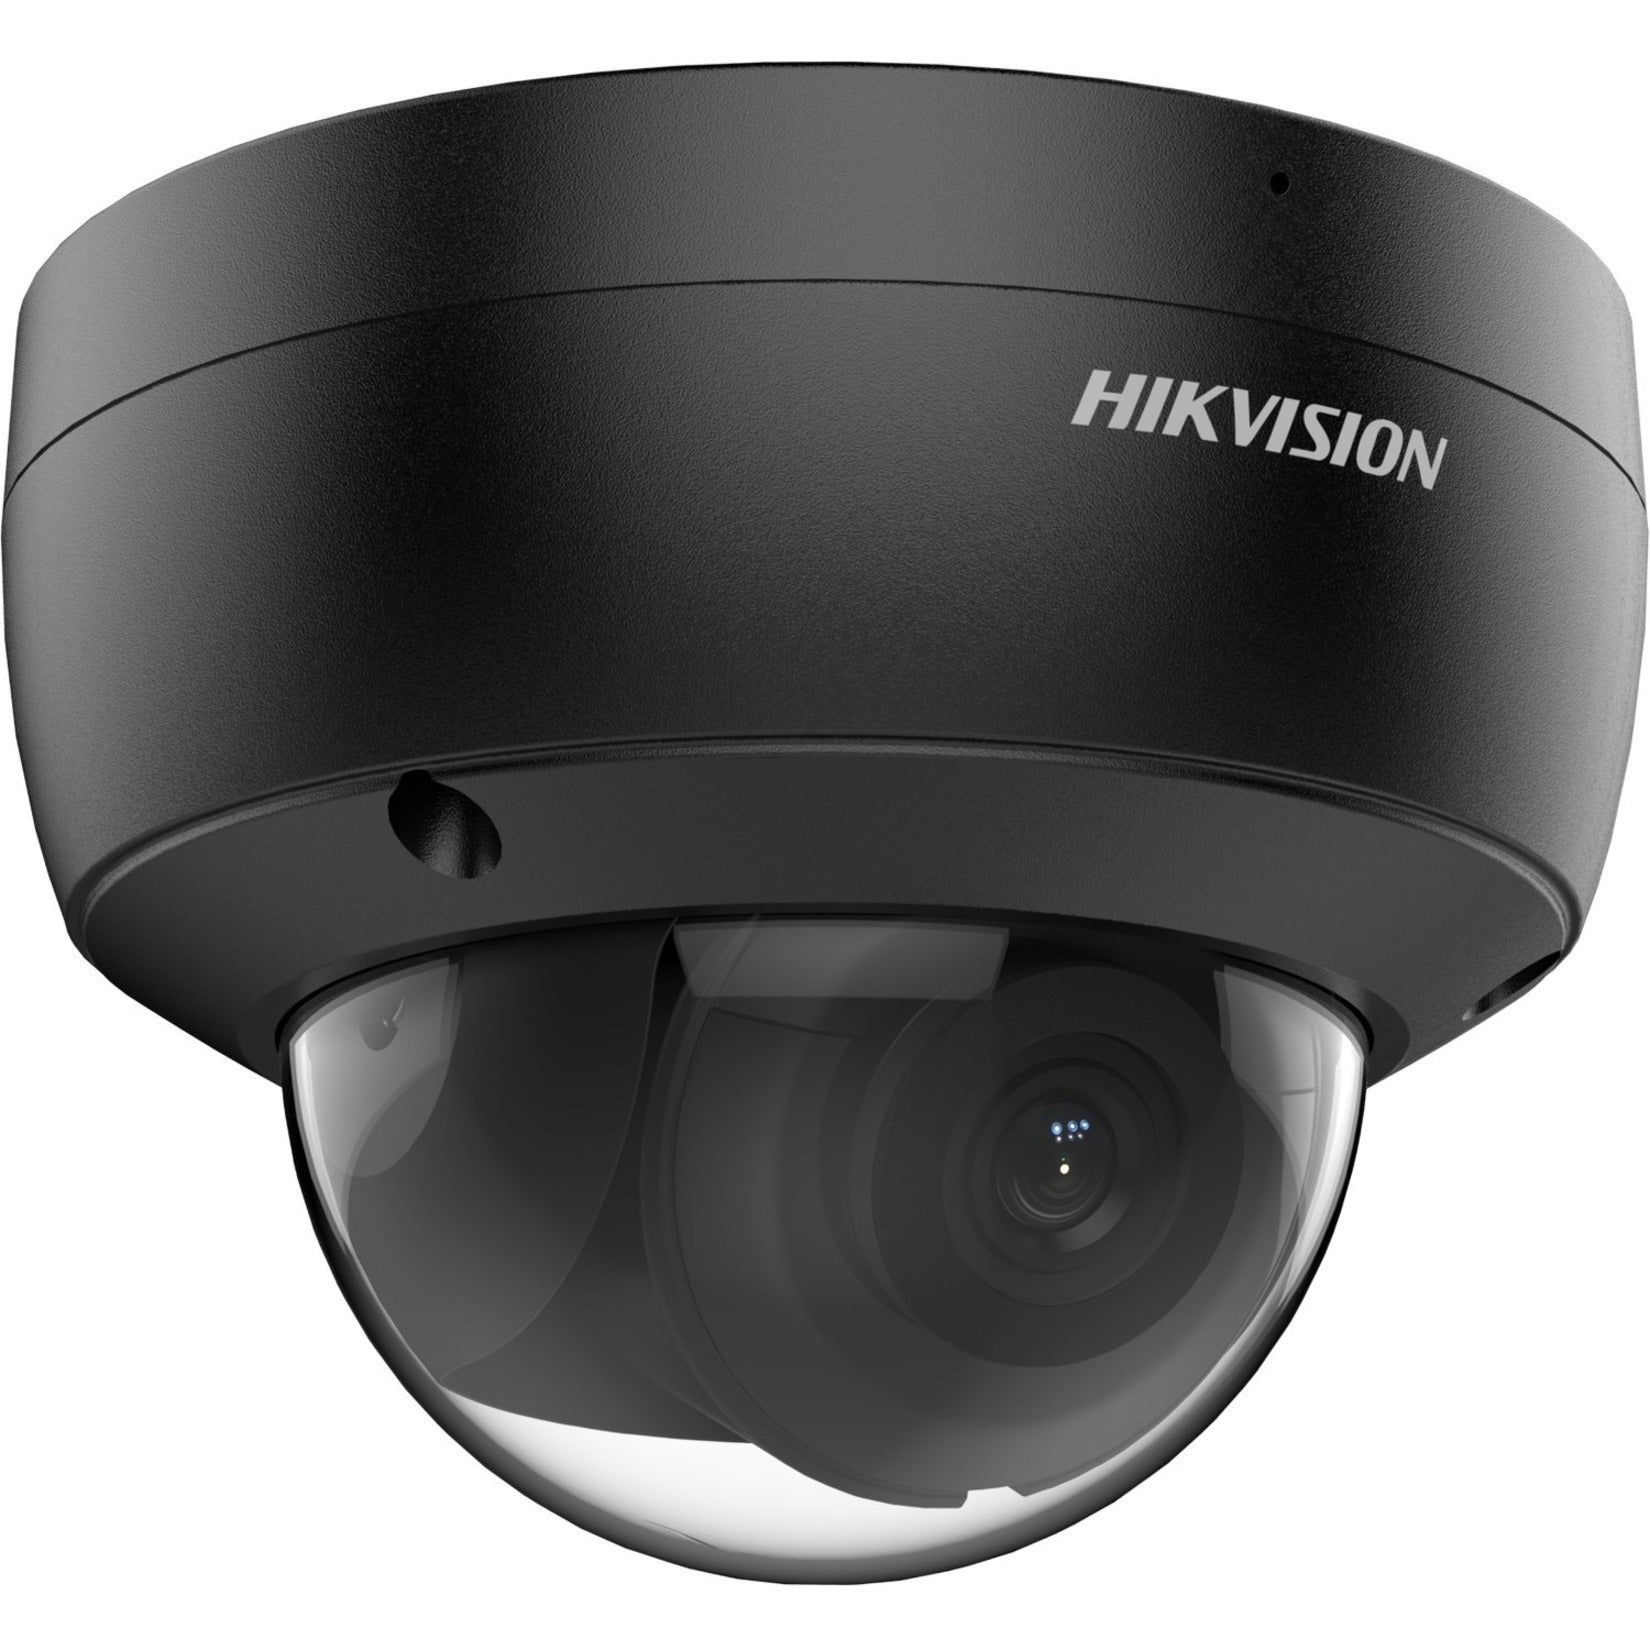 Hikvision DS-2CD2123G2-IU 4MM EasyIP 2 MP Vandal Built-in Mic Fixed Dome Network Camera, D/N IR 2MP 4mm 84